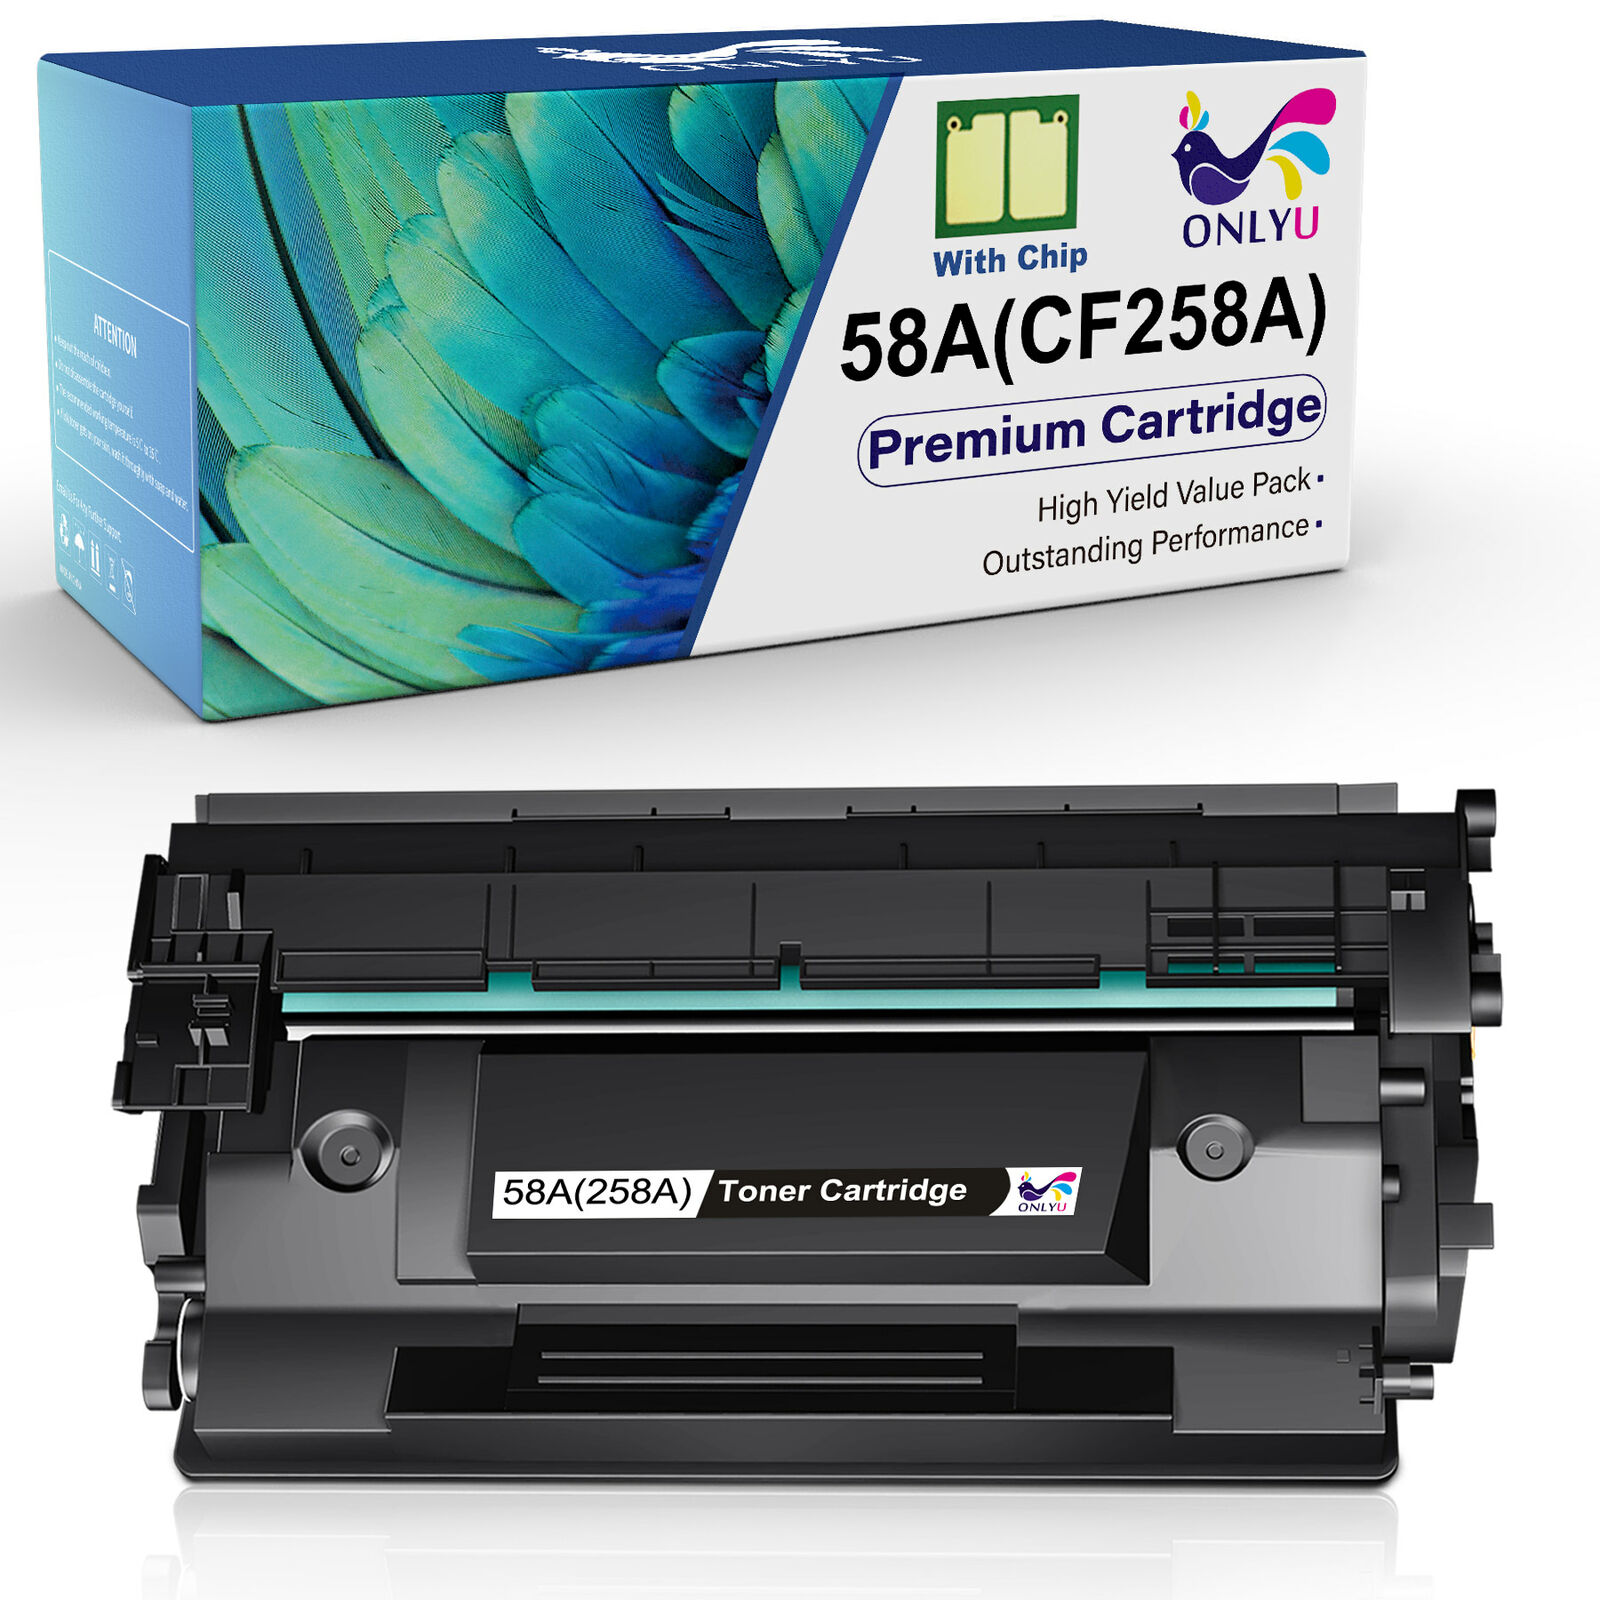 1PK 58A Toner Cartridge replacement for HP CF258A With Chip M428dw MFP M428fdn